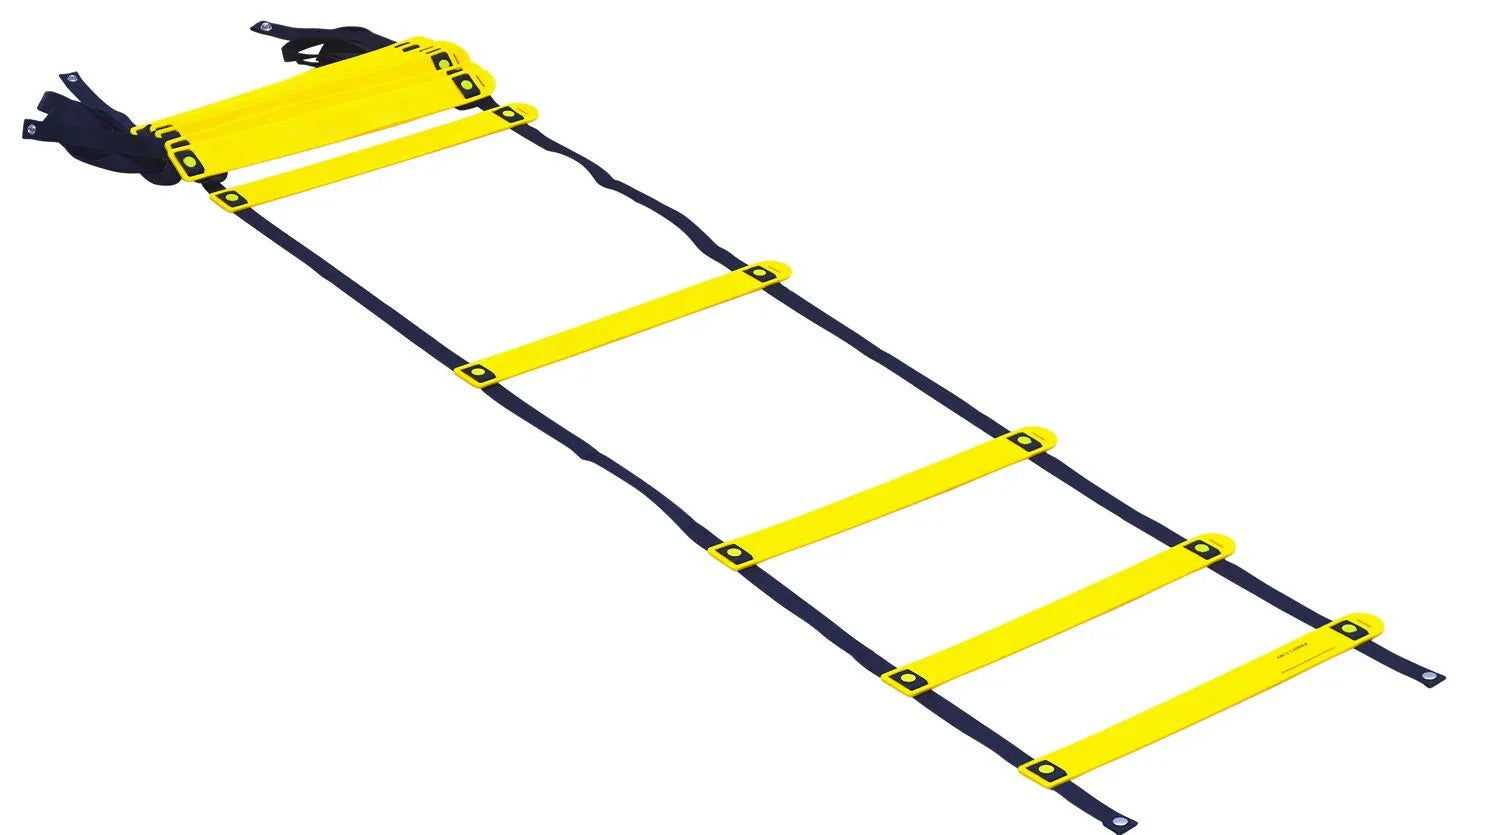 Prism Fitness Smart Modular Acceleration Ladder full view | Fitness Experience